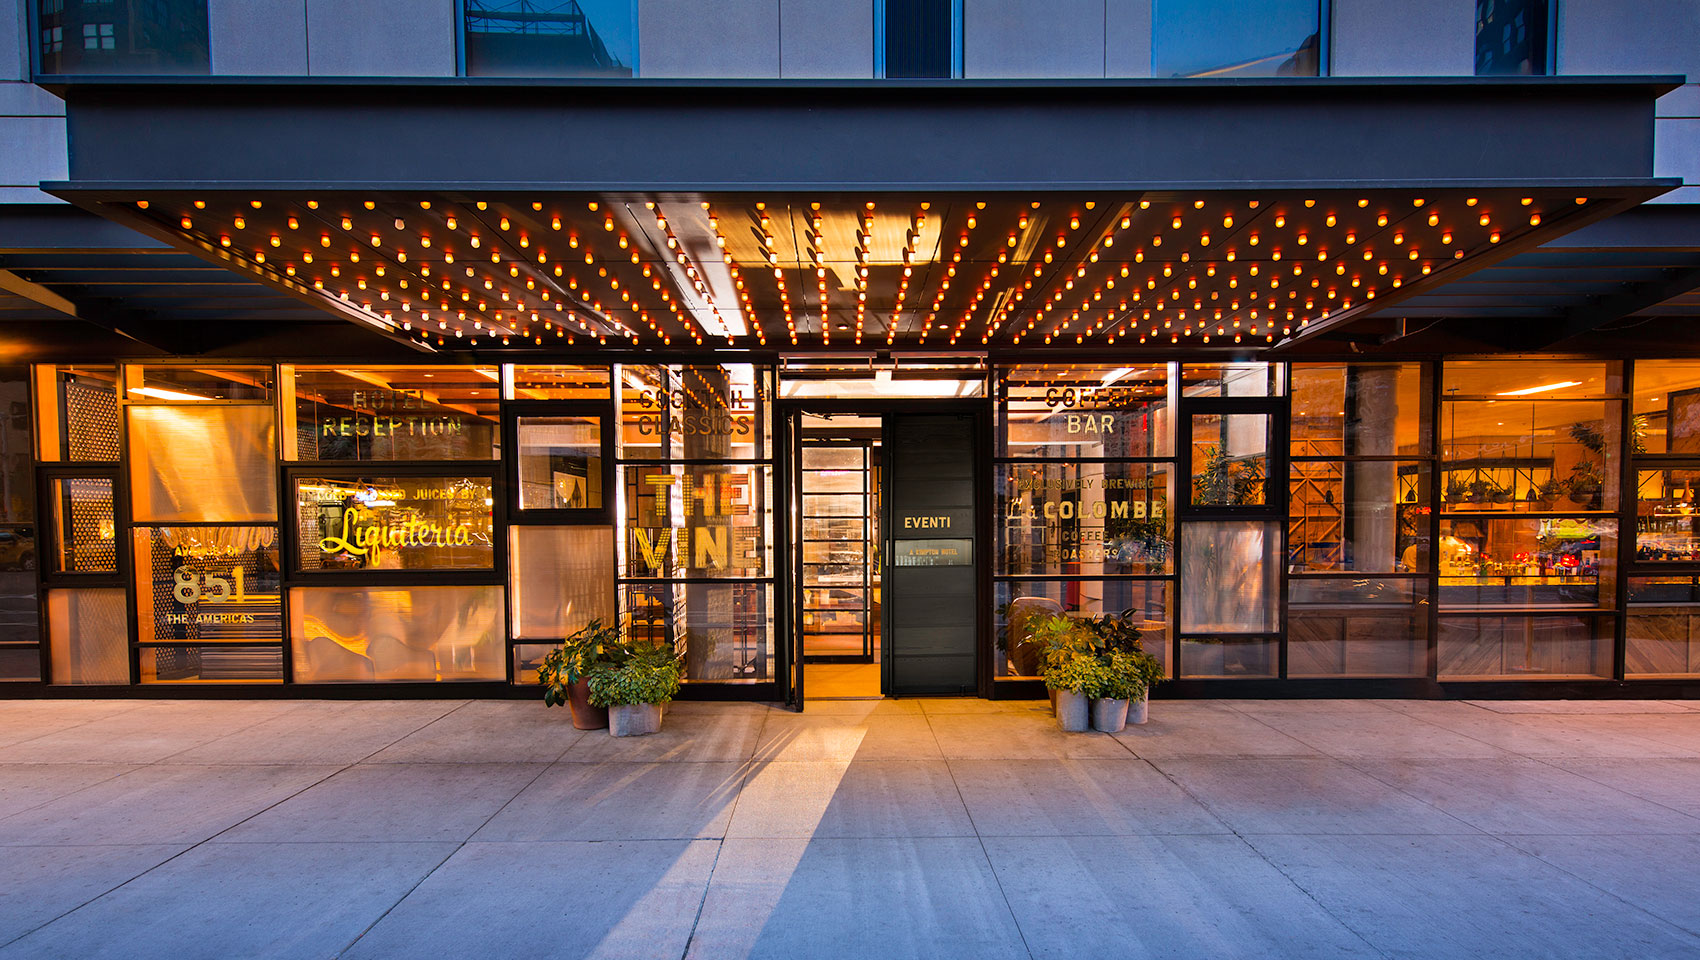 Kimpton Hotel Eventi front entrance façade with lighting and glass walls